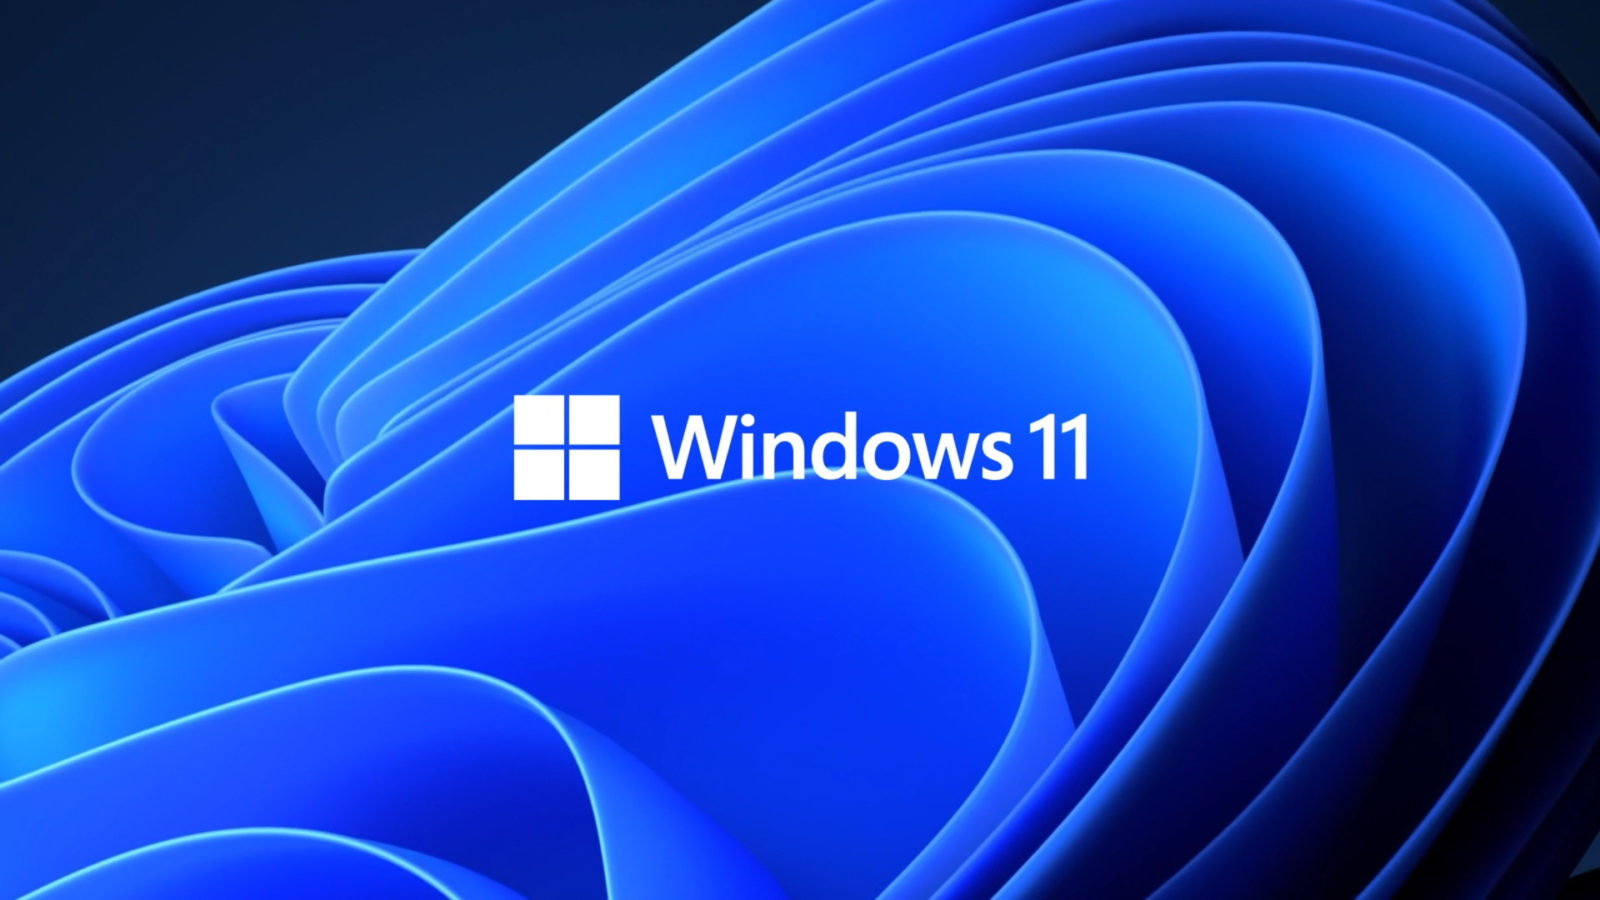 Microsoft is going to launch Windows 11 on 5th October